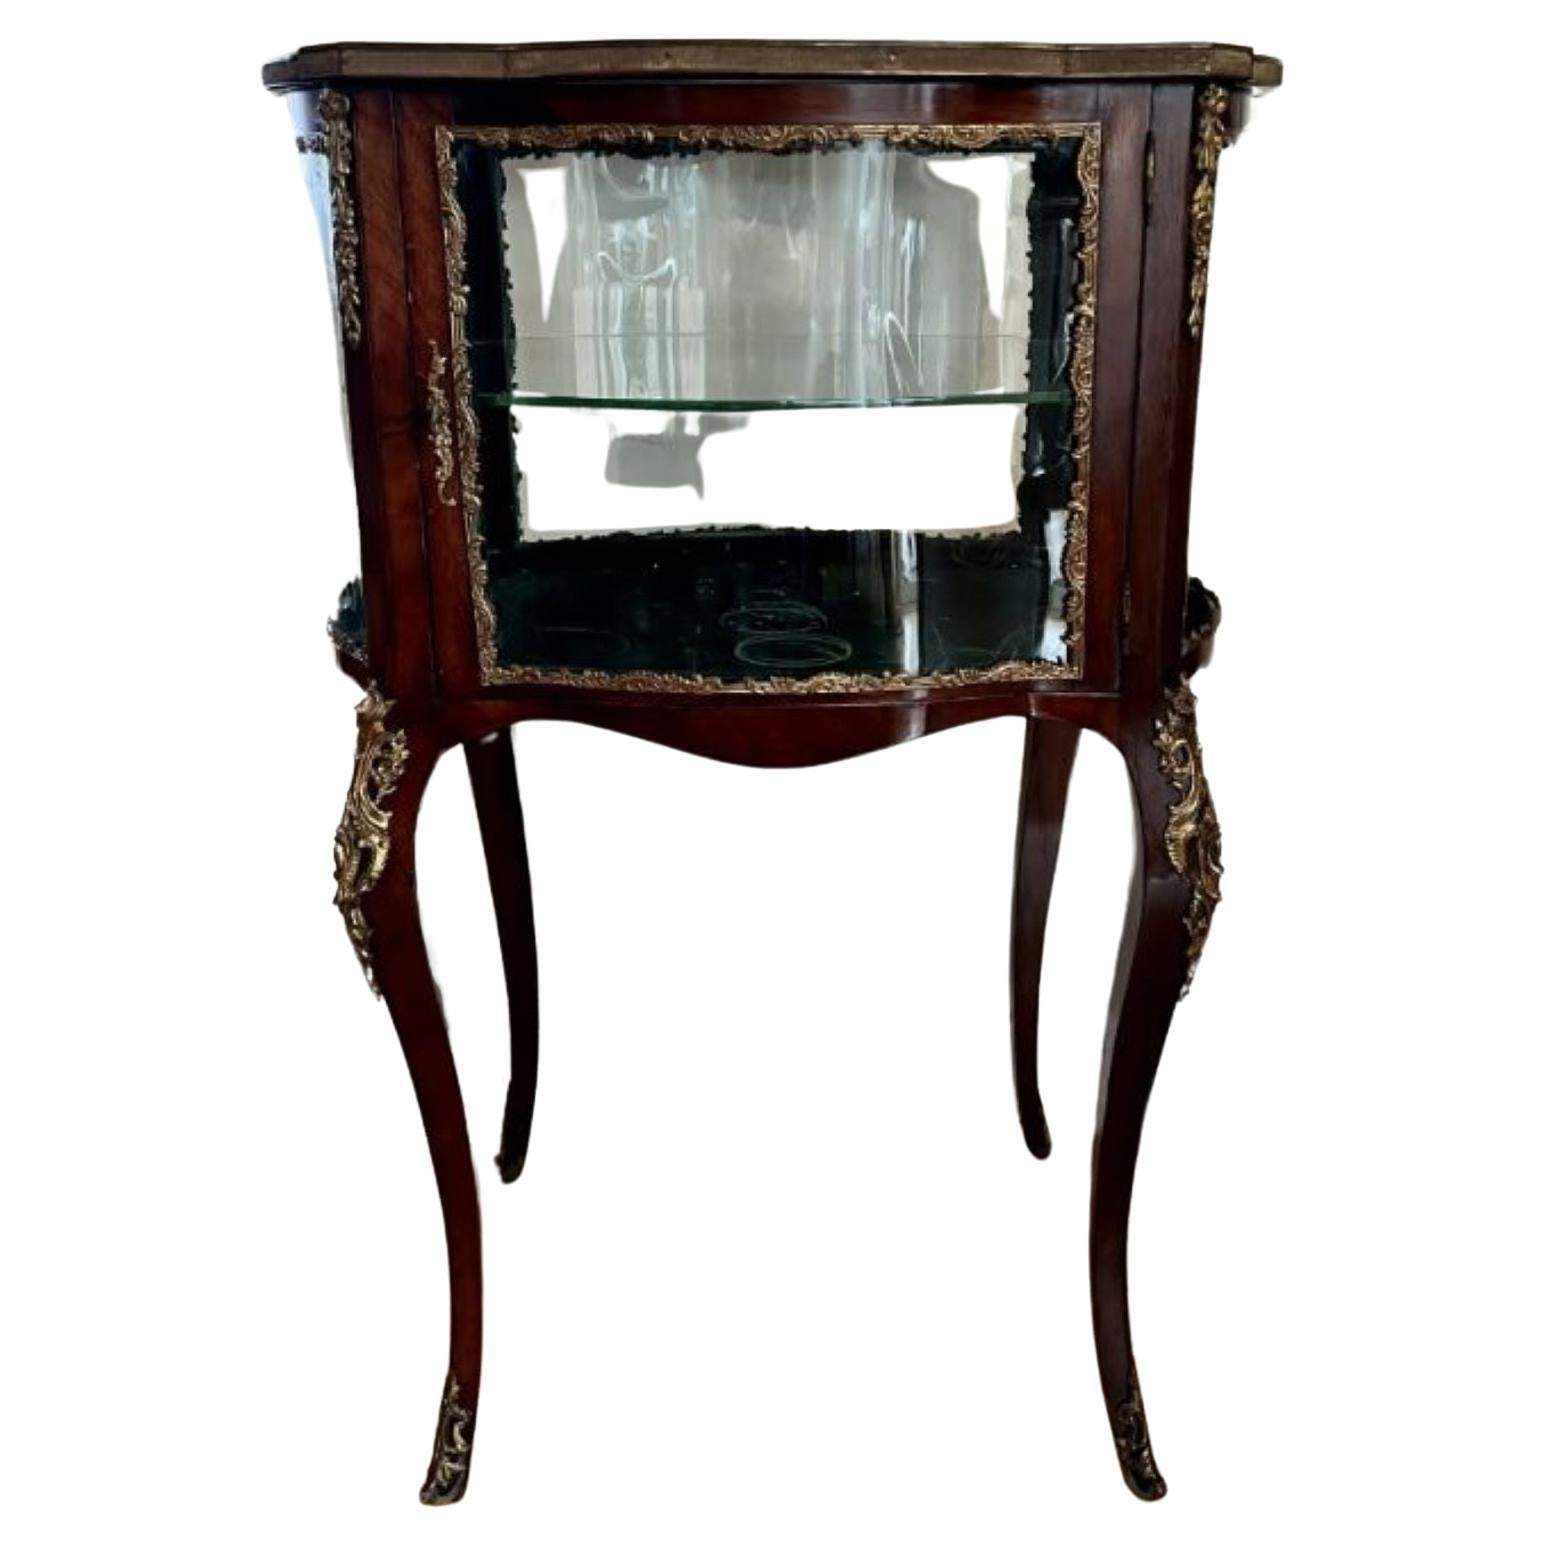 Fine quality antique Victorian French freestanding ormolu mounted cabinet For Sale